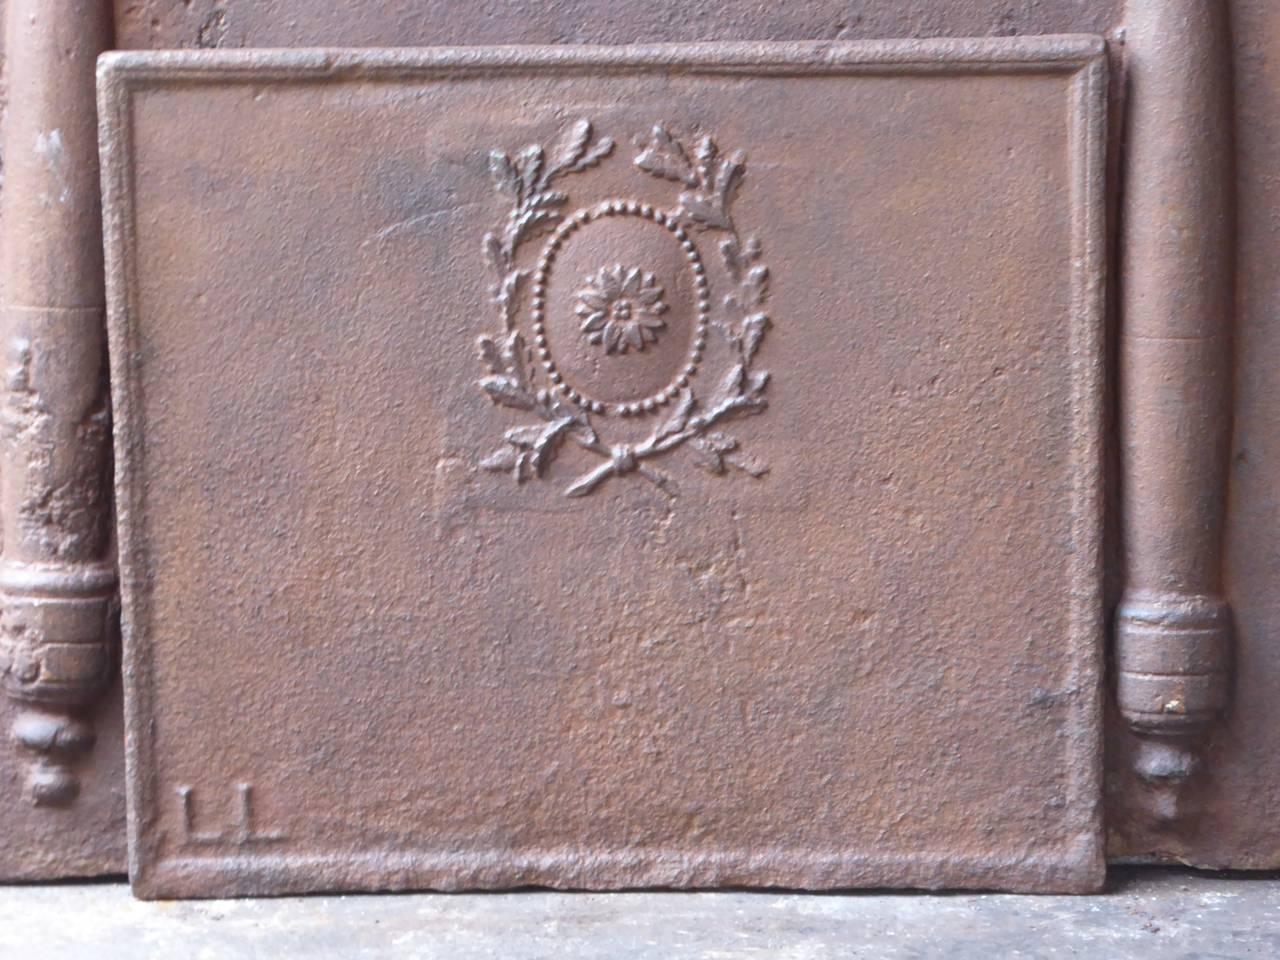 19th century French fireback with a decoration, including an olive wreath. The olive branches symbolize peace and victory. In the left corner, the initials L.L. are cast.

We have a unique and specialized collection of antique and used fireplace